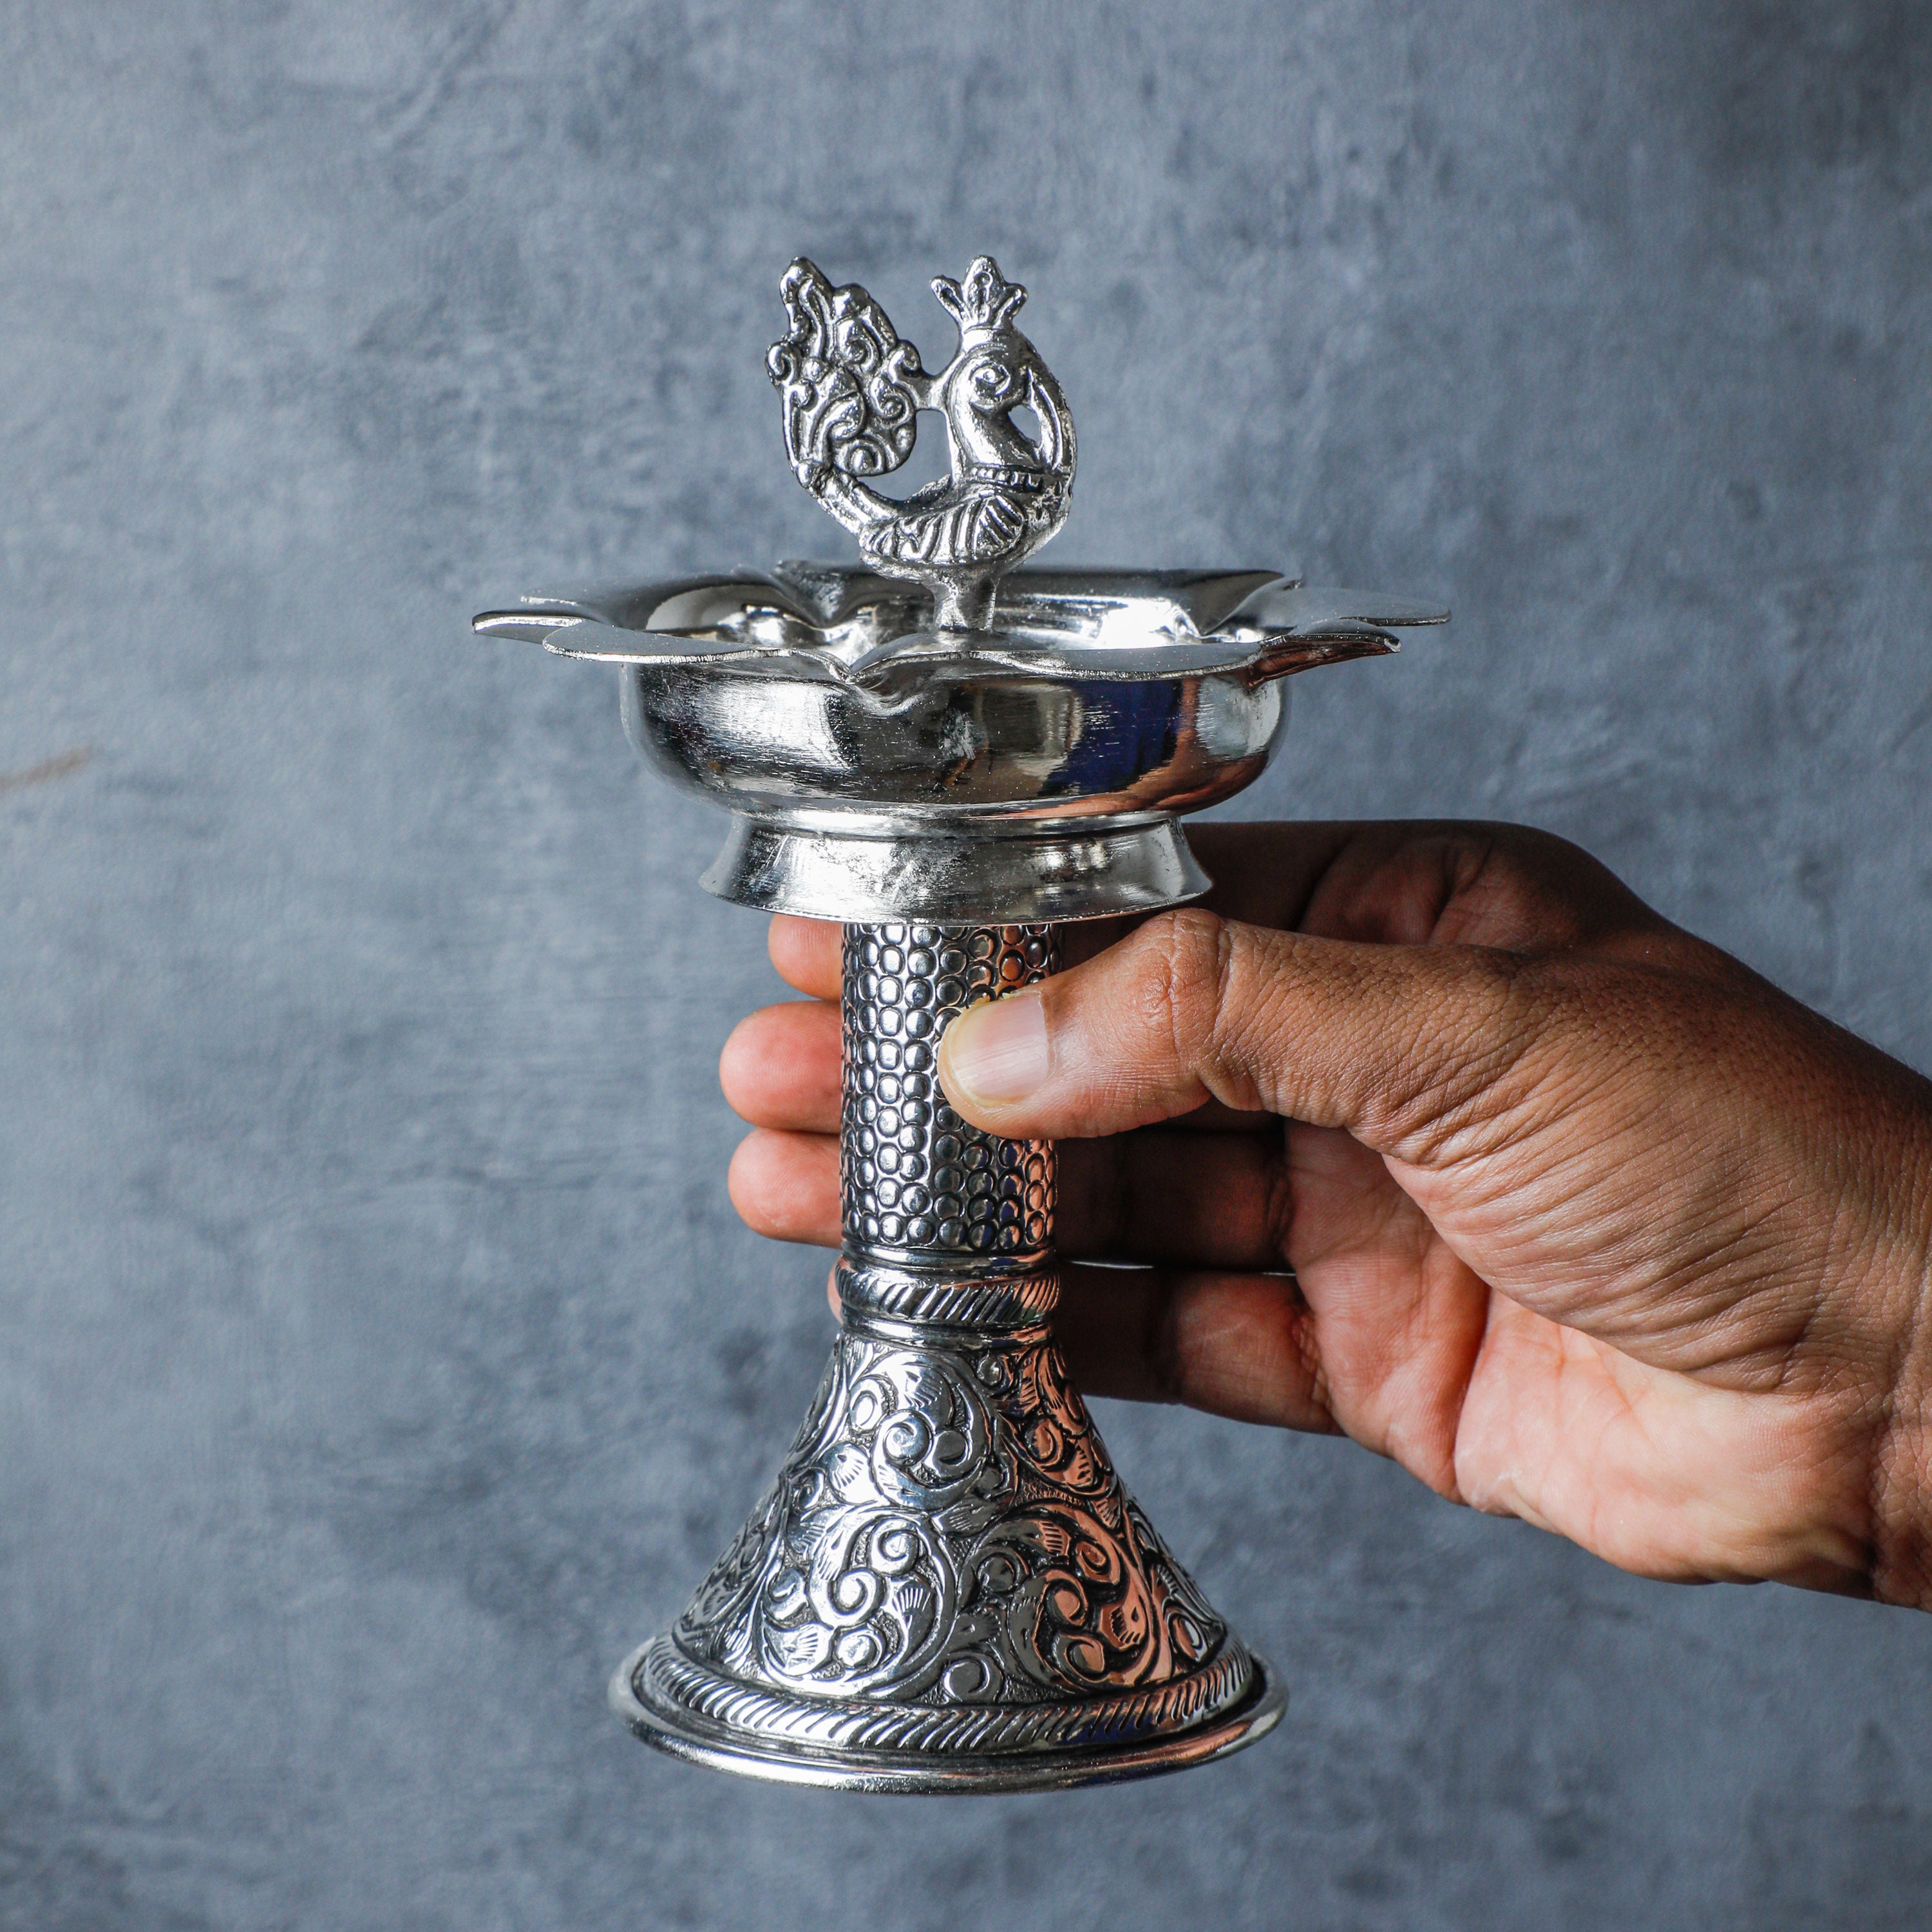 Designed to captivate hearts, this diya symbolizes grace and beauty with its intricate detailing and shimmering silver plating.